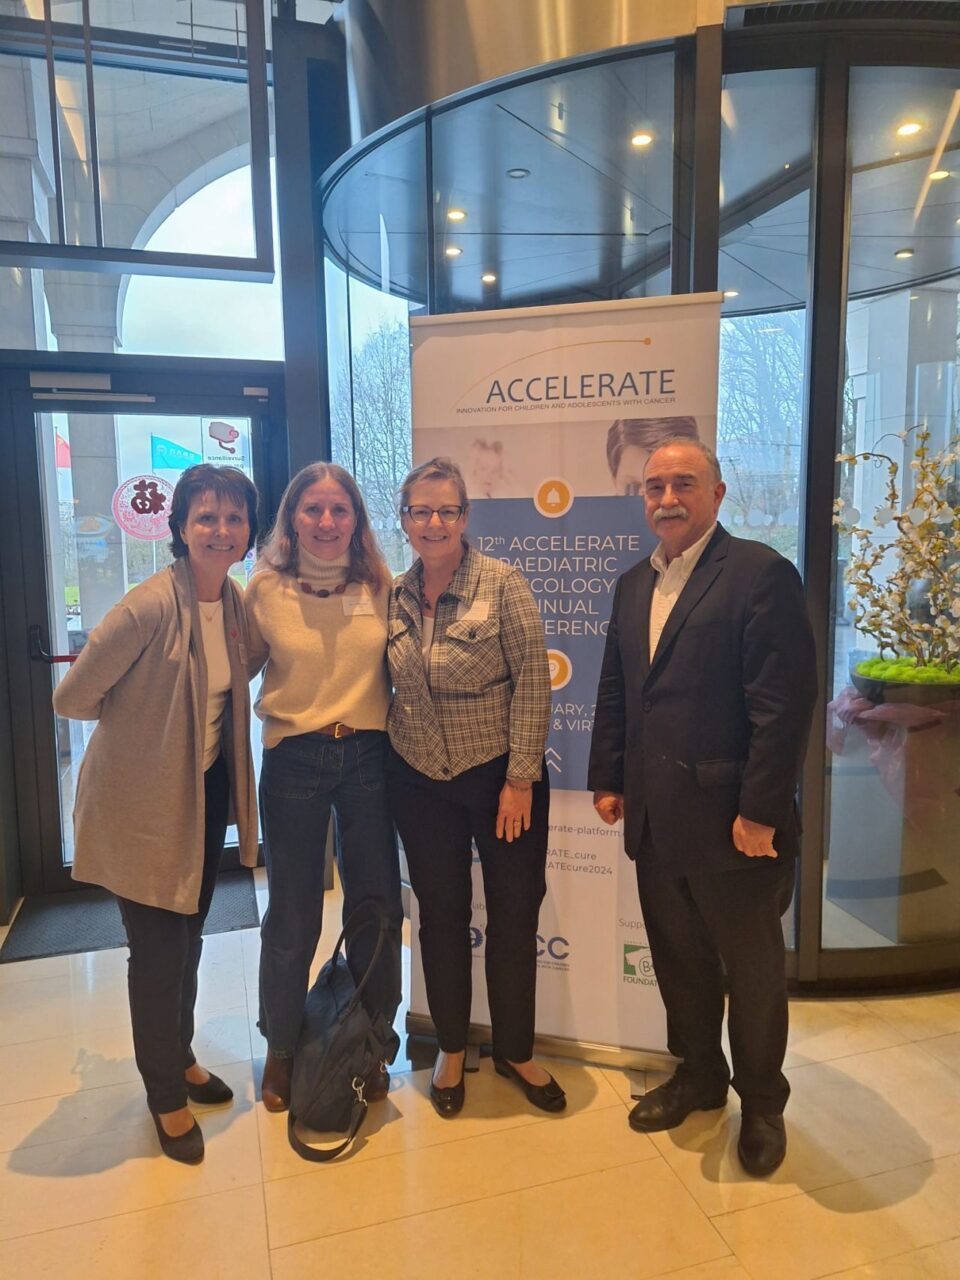 Exciting updates from Session II at ACCELERATE cure 2024 Annual Conference – ACCELERATE Multi-Stakeholder Platform